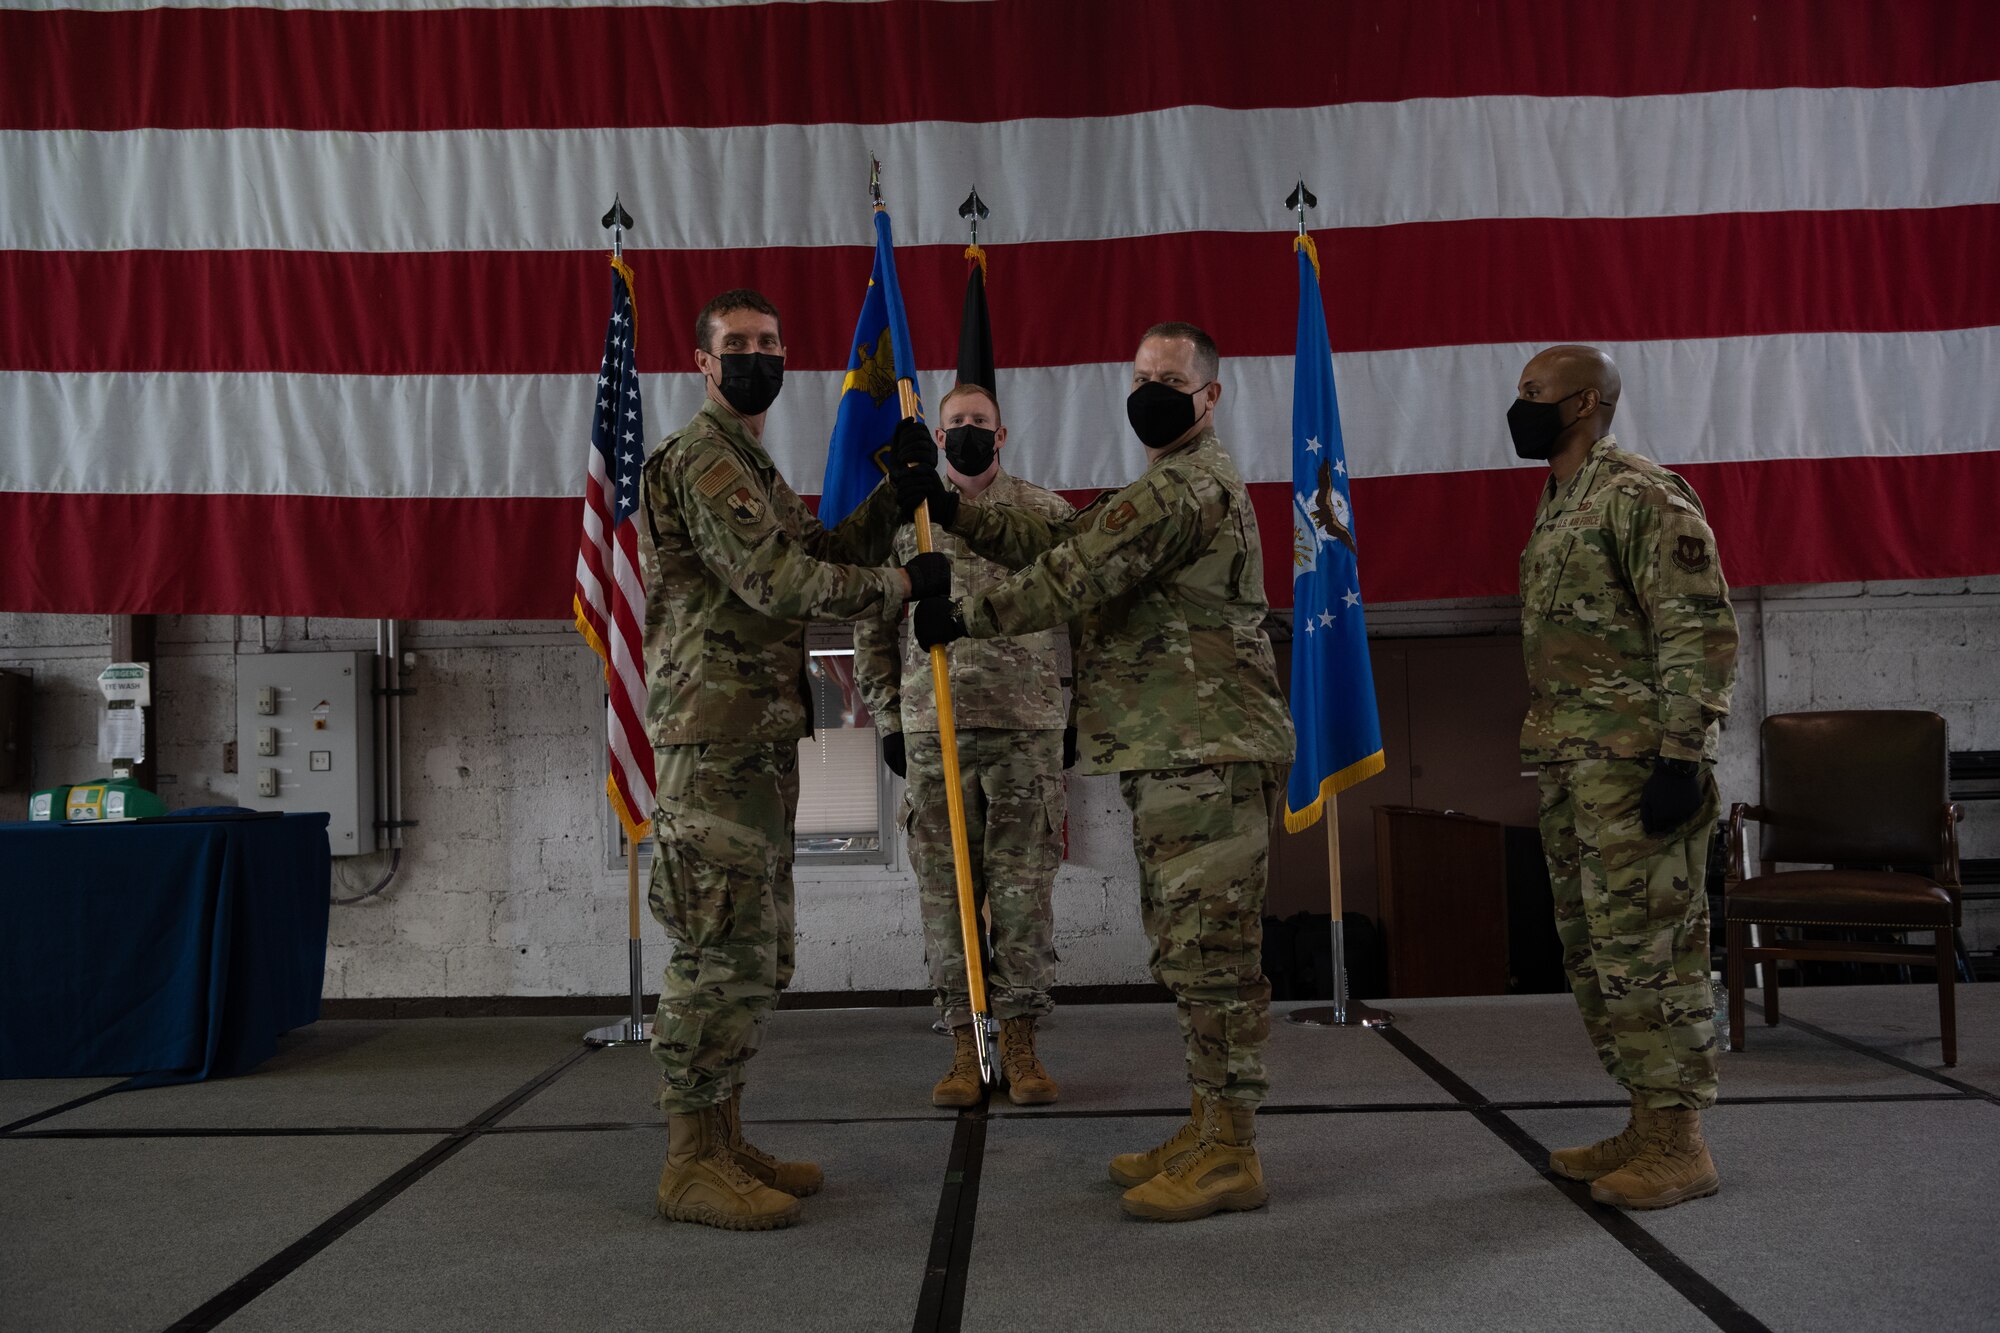 U.S. Air Force Lt. Col Shawn Schulz, outgoing 52nd Comptroller Squadron commander (right), passes the guidon to Col. David Epperson, 52nd Fighter Wing commander, at the 52nd CPTS change of command ceremony at Spangdahlem Air Base, Germany, June 30, 2021. Throughout his time at Spangdahlem AB, Schulz increased the cost-of-living allowance for more than 5,000 personnel by more than 80%. (U.S. Air Force photo by Senior Airman Ali Stewart)